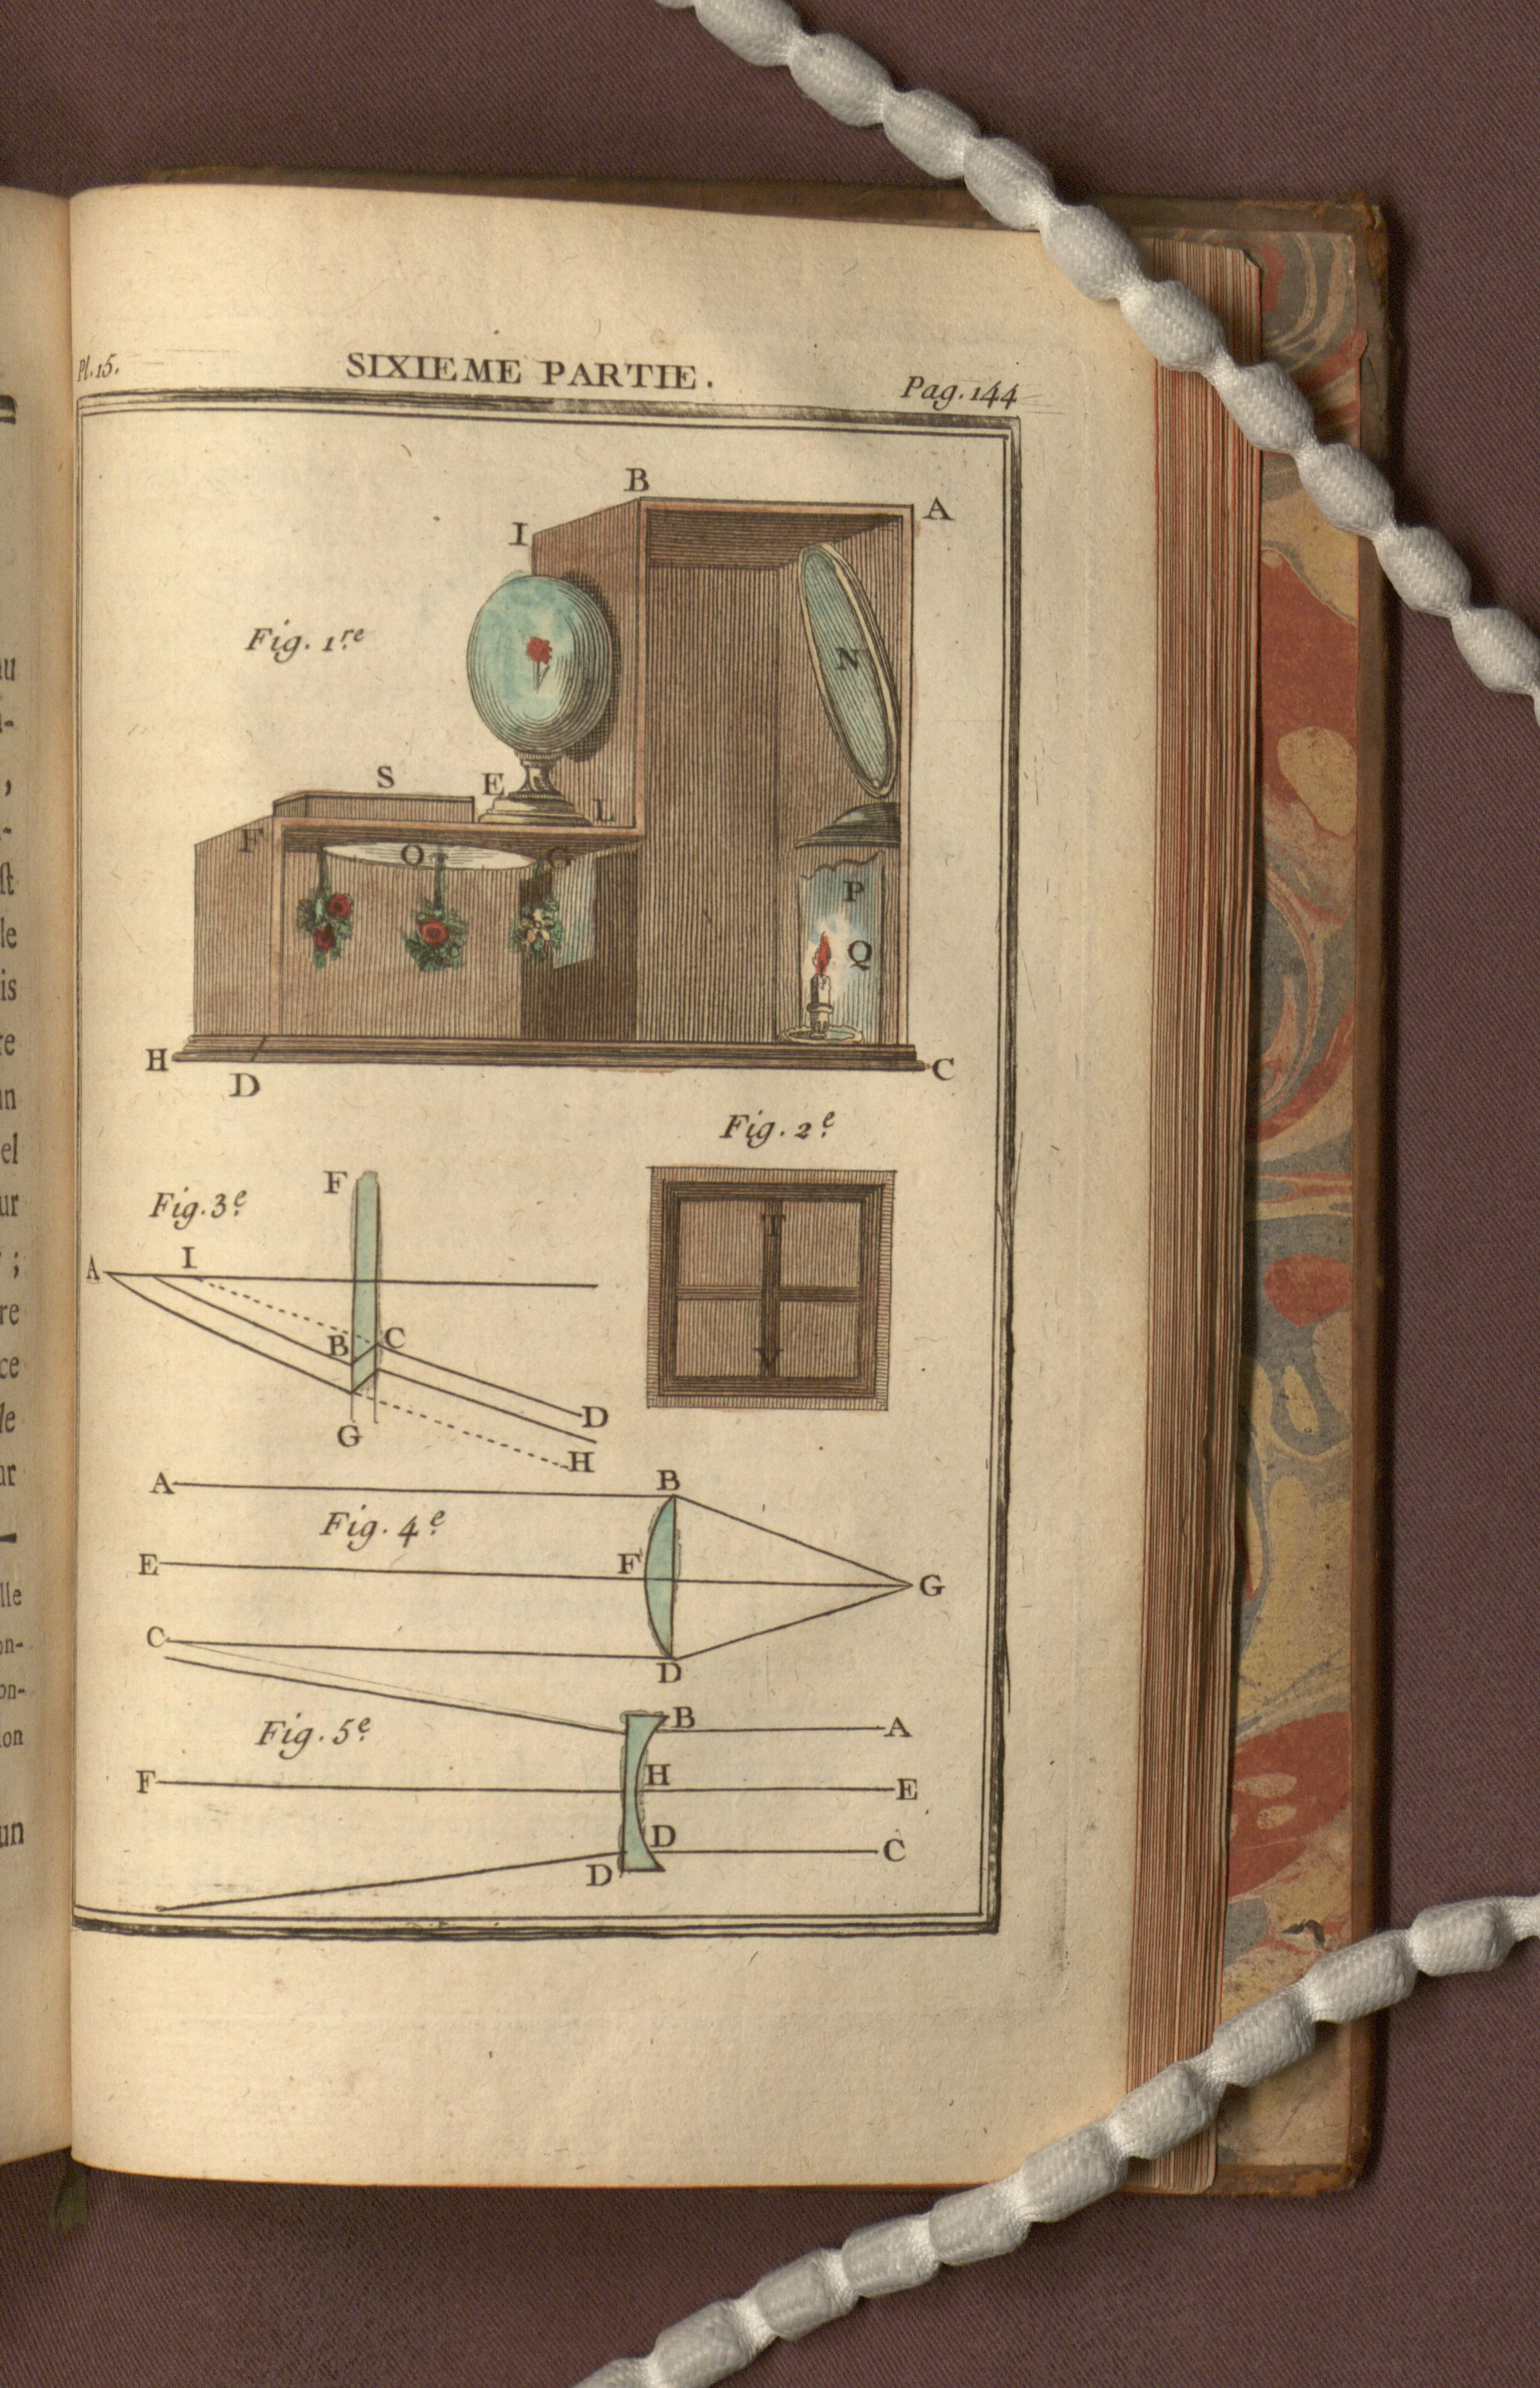 Illustrations explaining the construction of an optic device